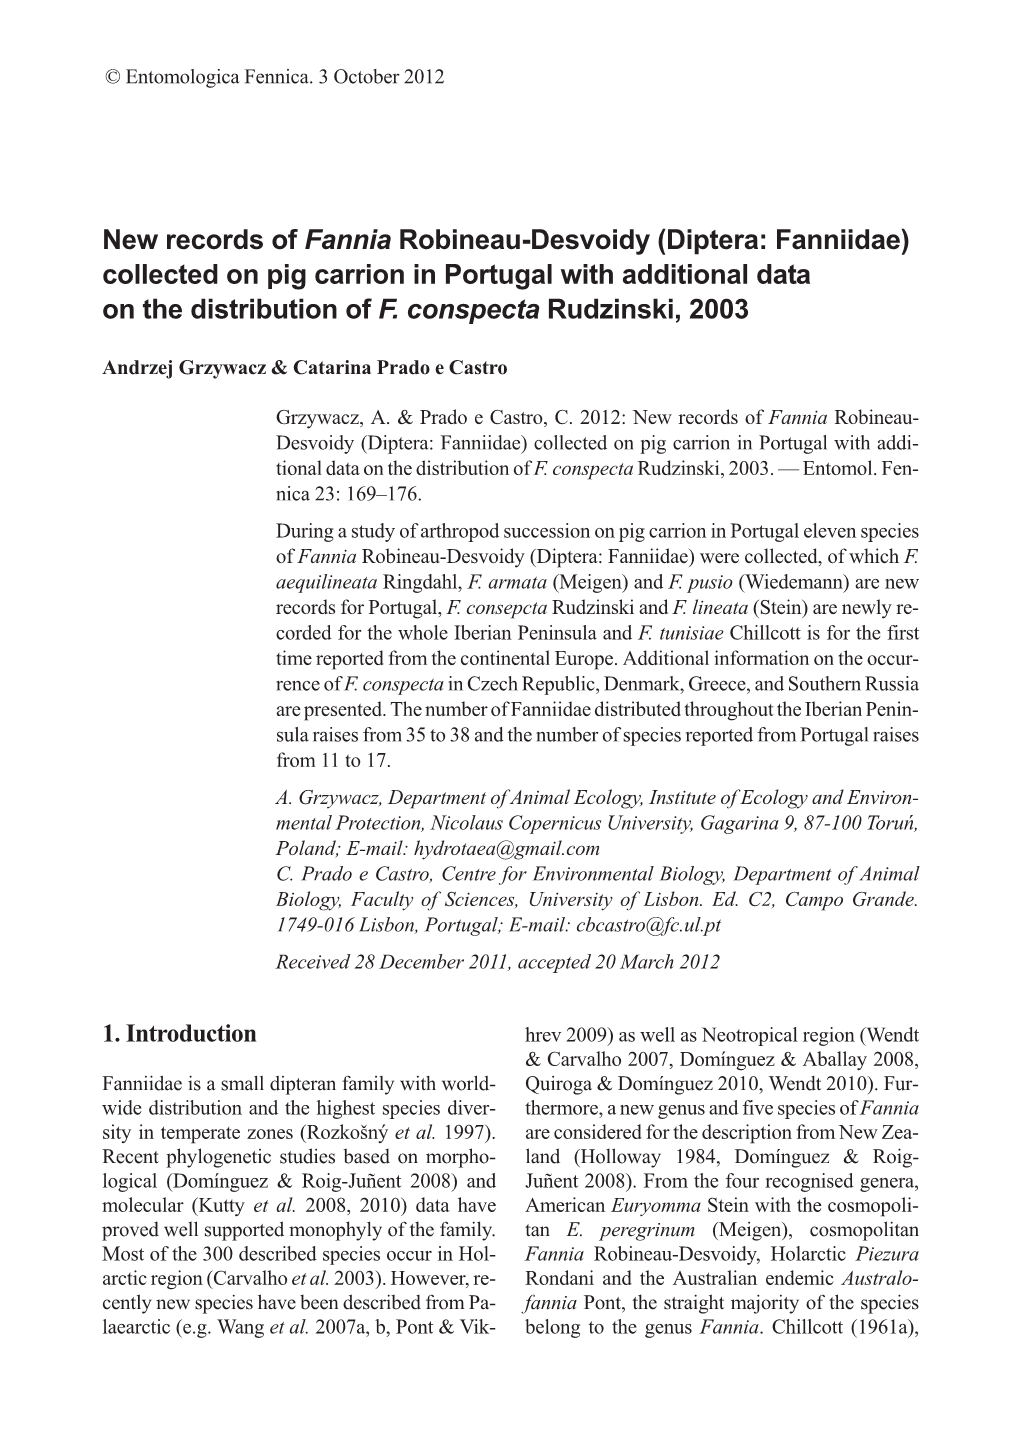 Diptera: Fanniidae) Collected on Pig Carrion in Portugal with Additional Data on the Distribution of F